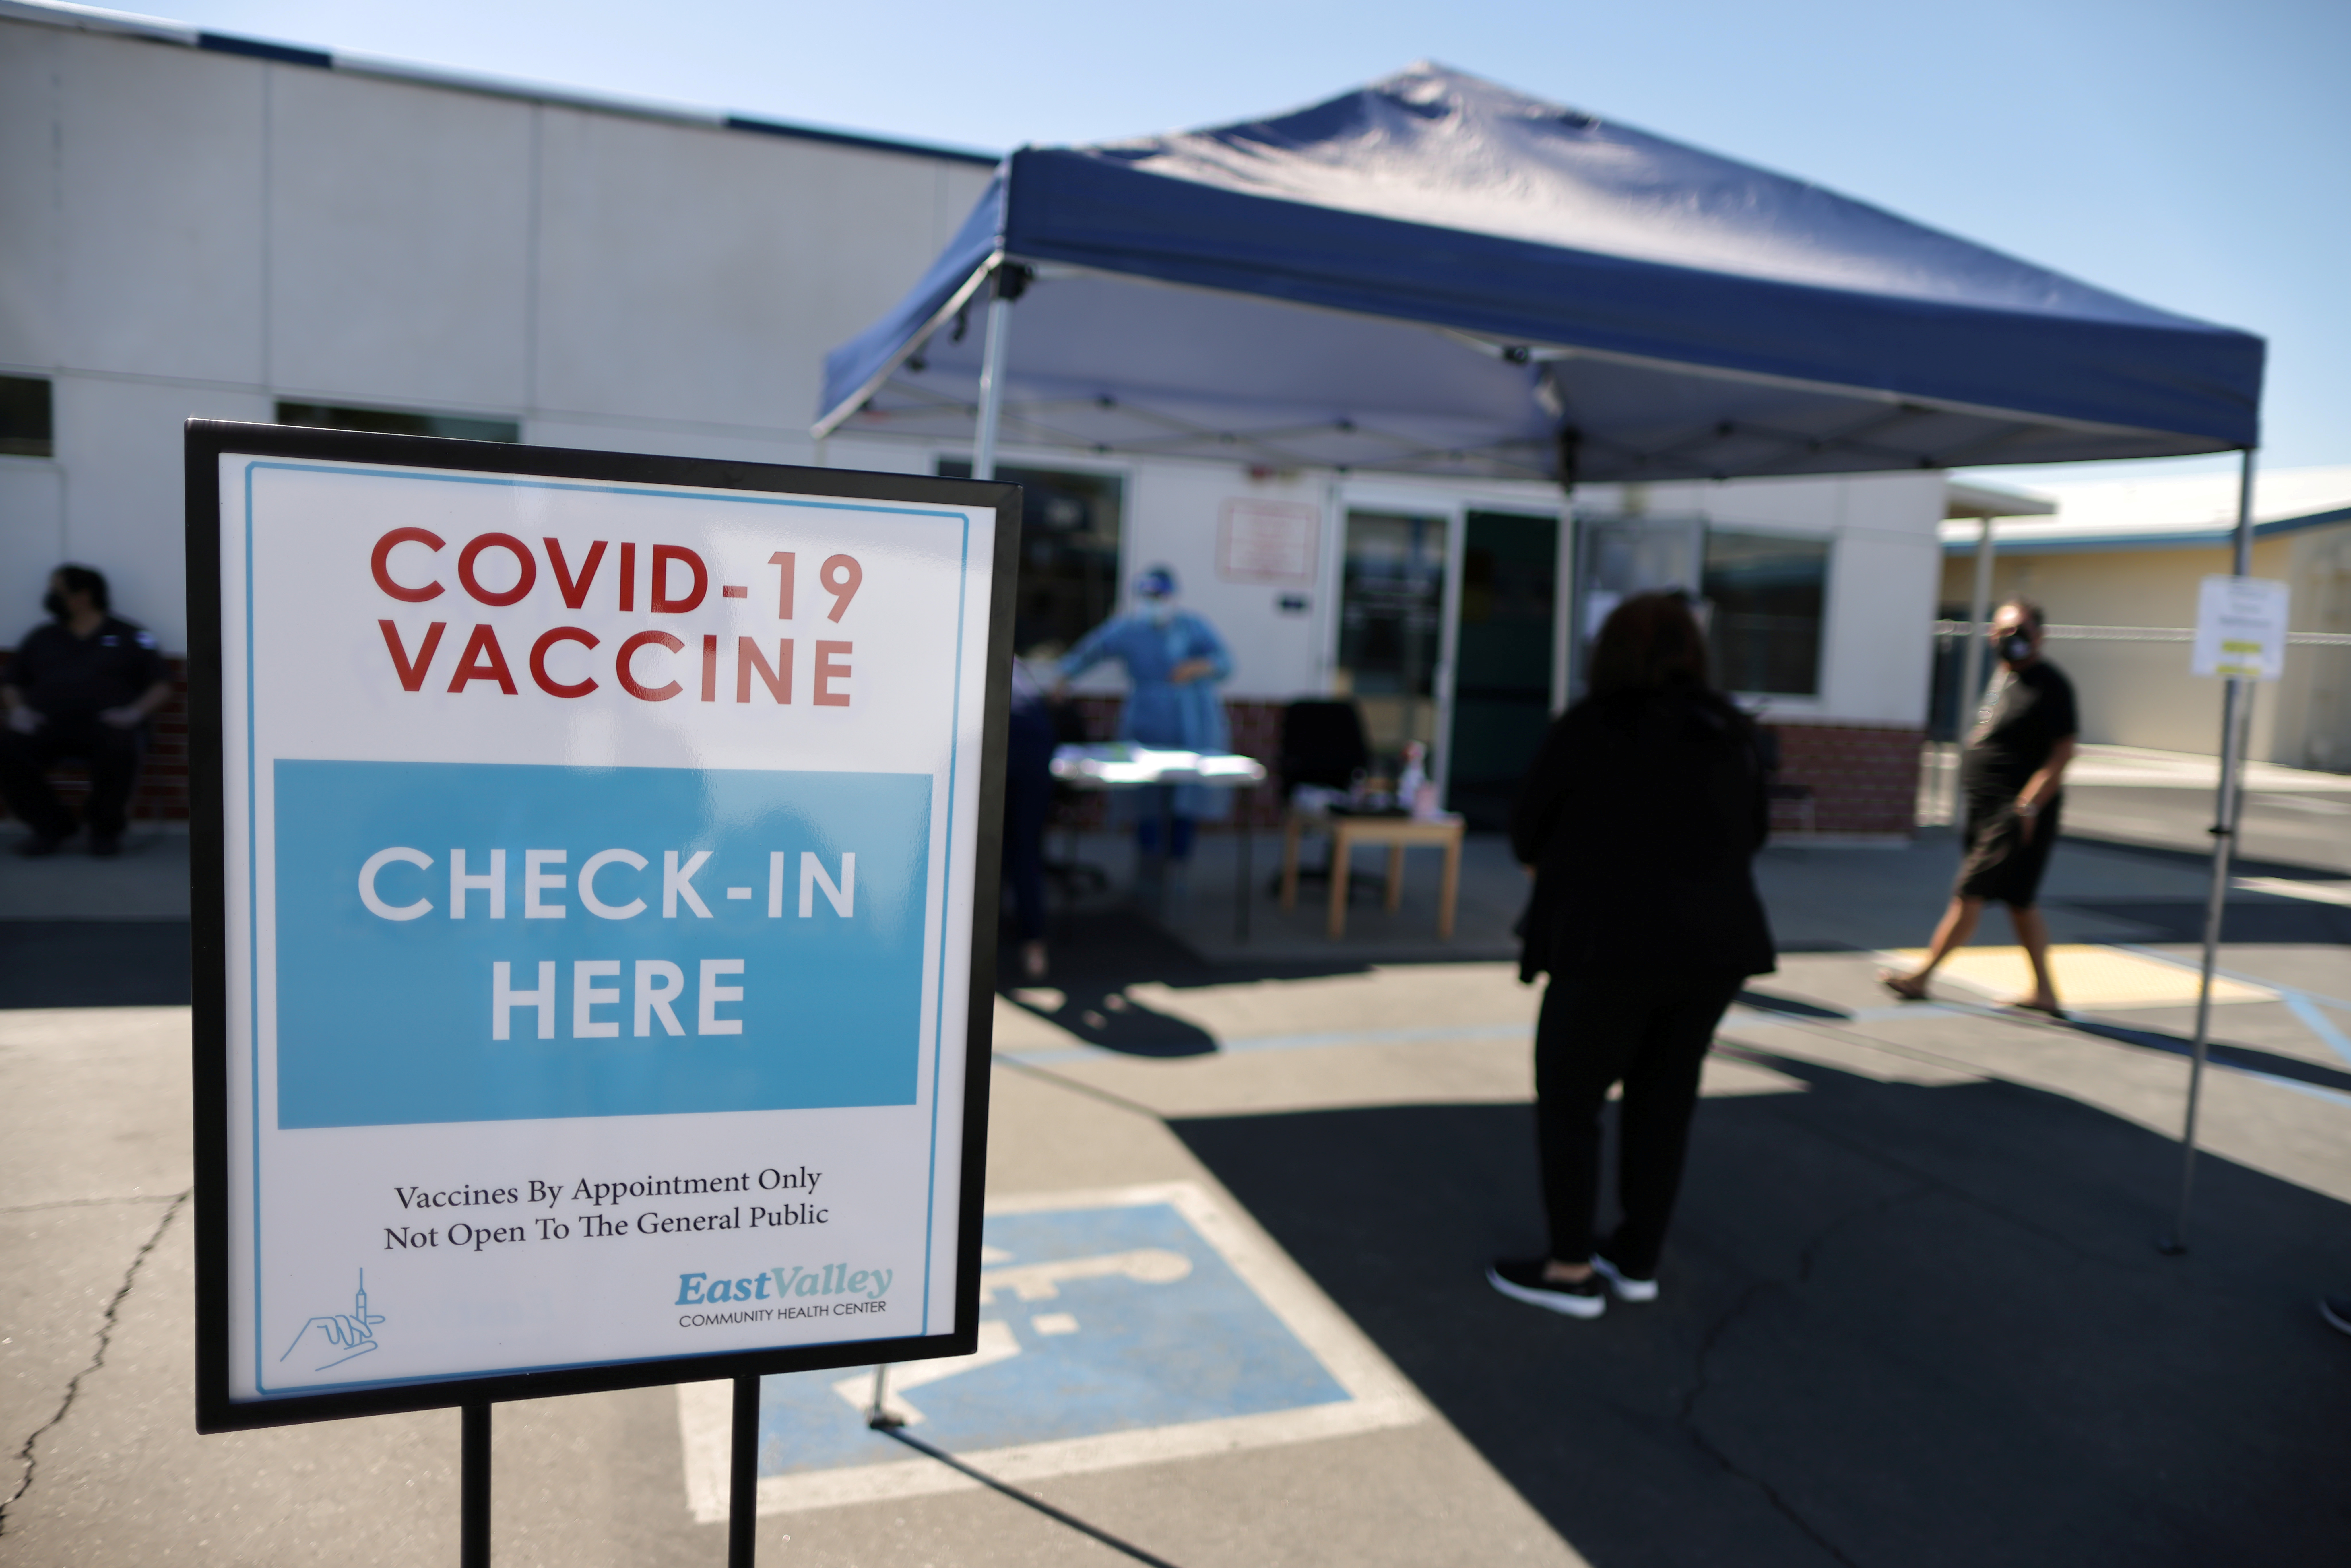 People arrive for coronavirus disease (COVID-19) vaccinations, at East Valley Community Health Center in La Puente